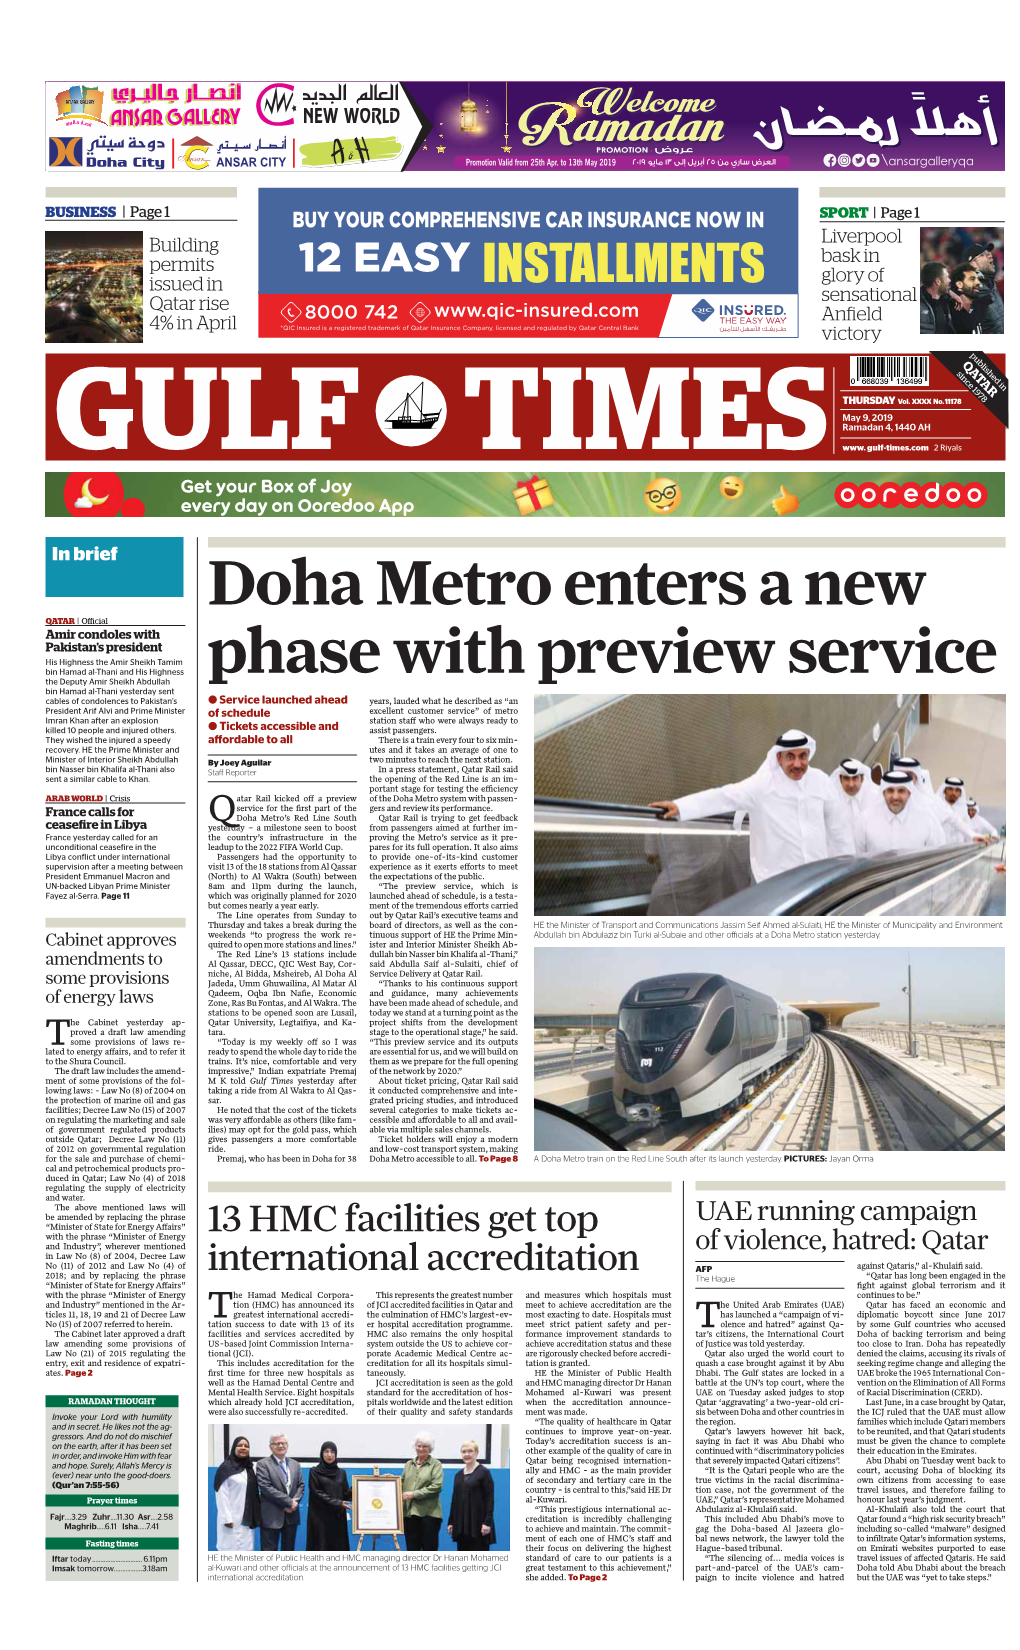 Doha Metro Enters a New Phase with Preview Service